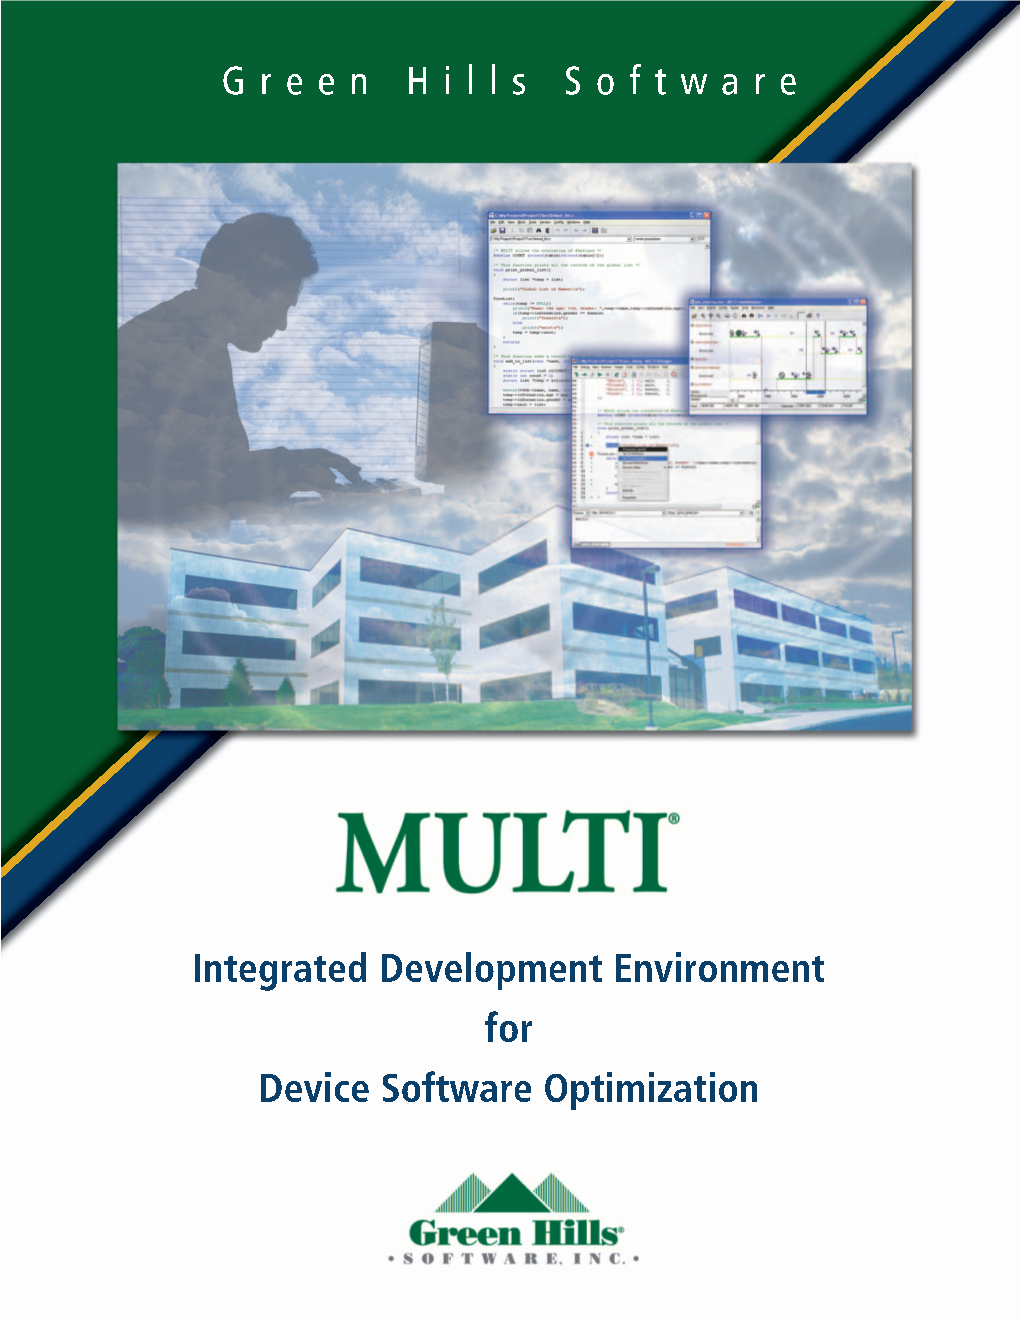 MULTI Integrated Development Environment for Device Software